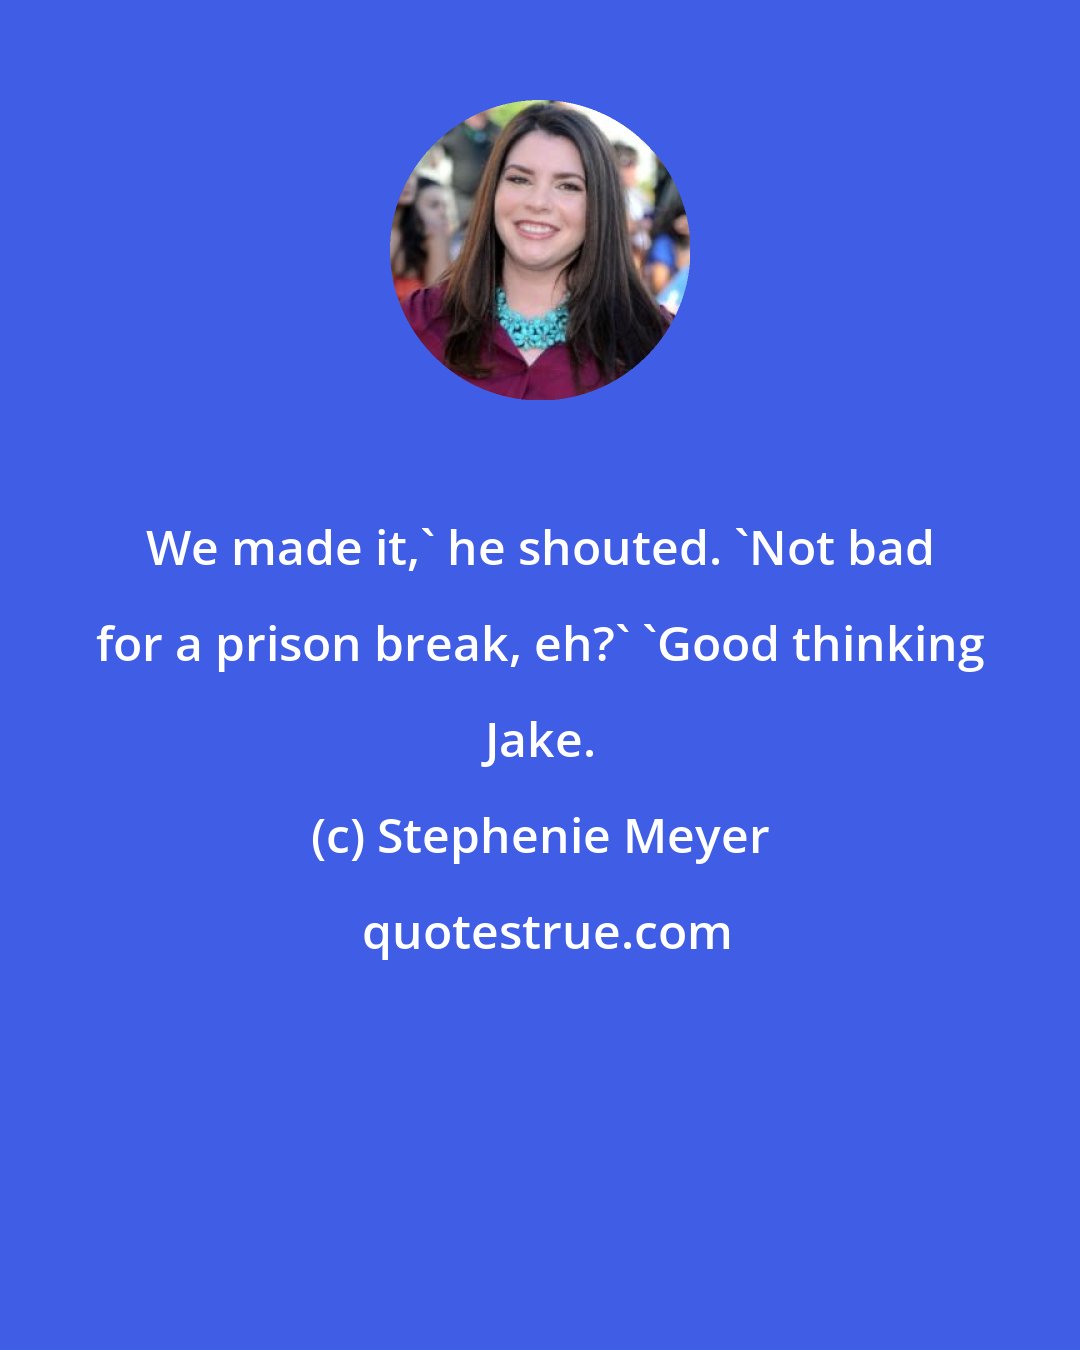 Stephenie Meyer: We made it,' he shouted. 'Not bad for a prison break, eh?' 'Good thinking Jake.